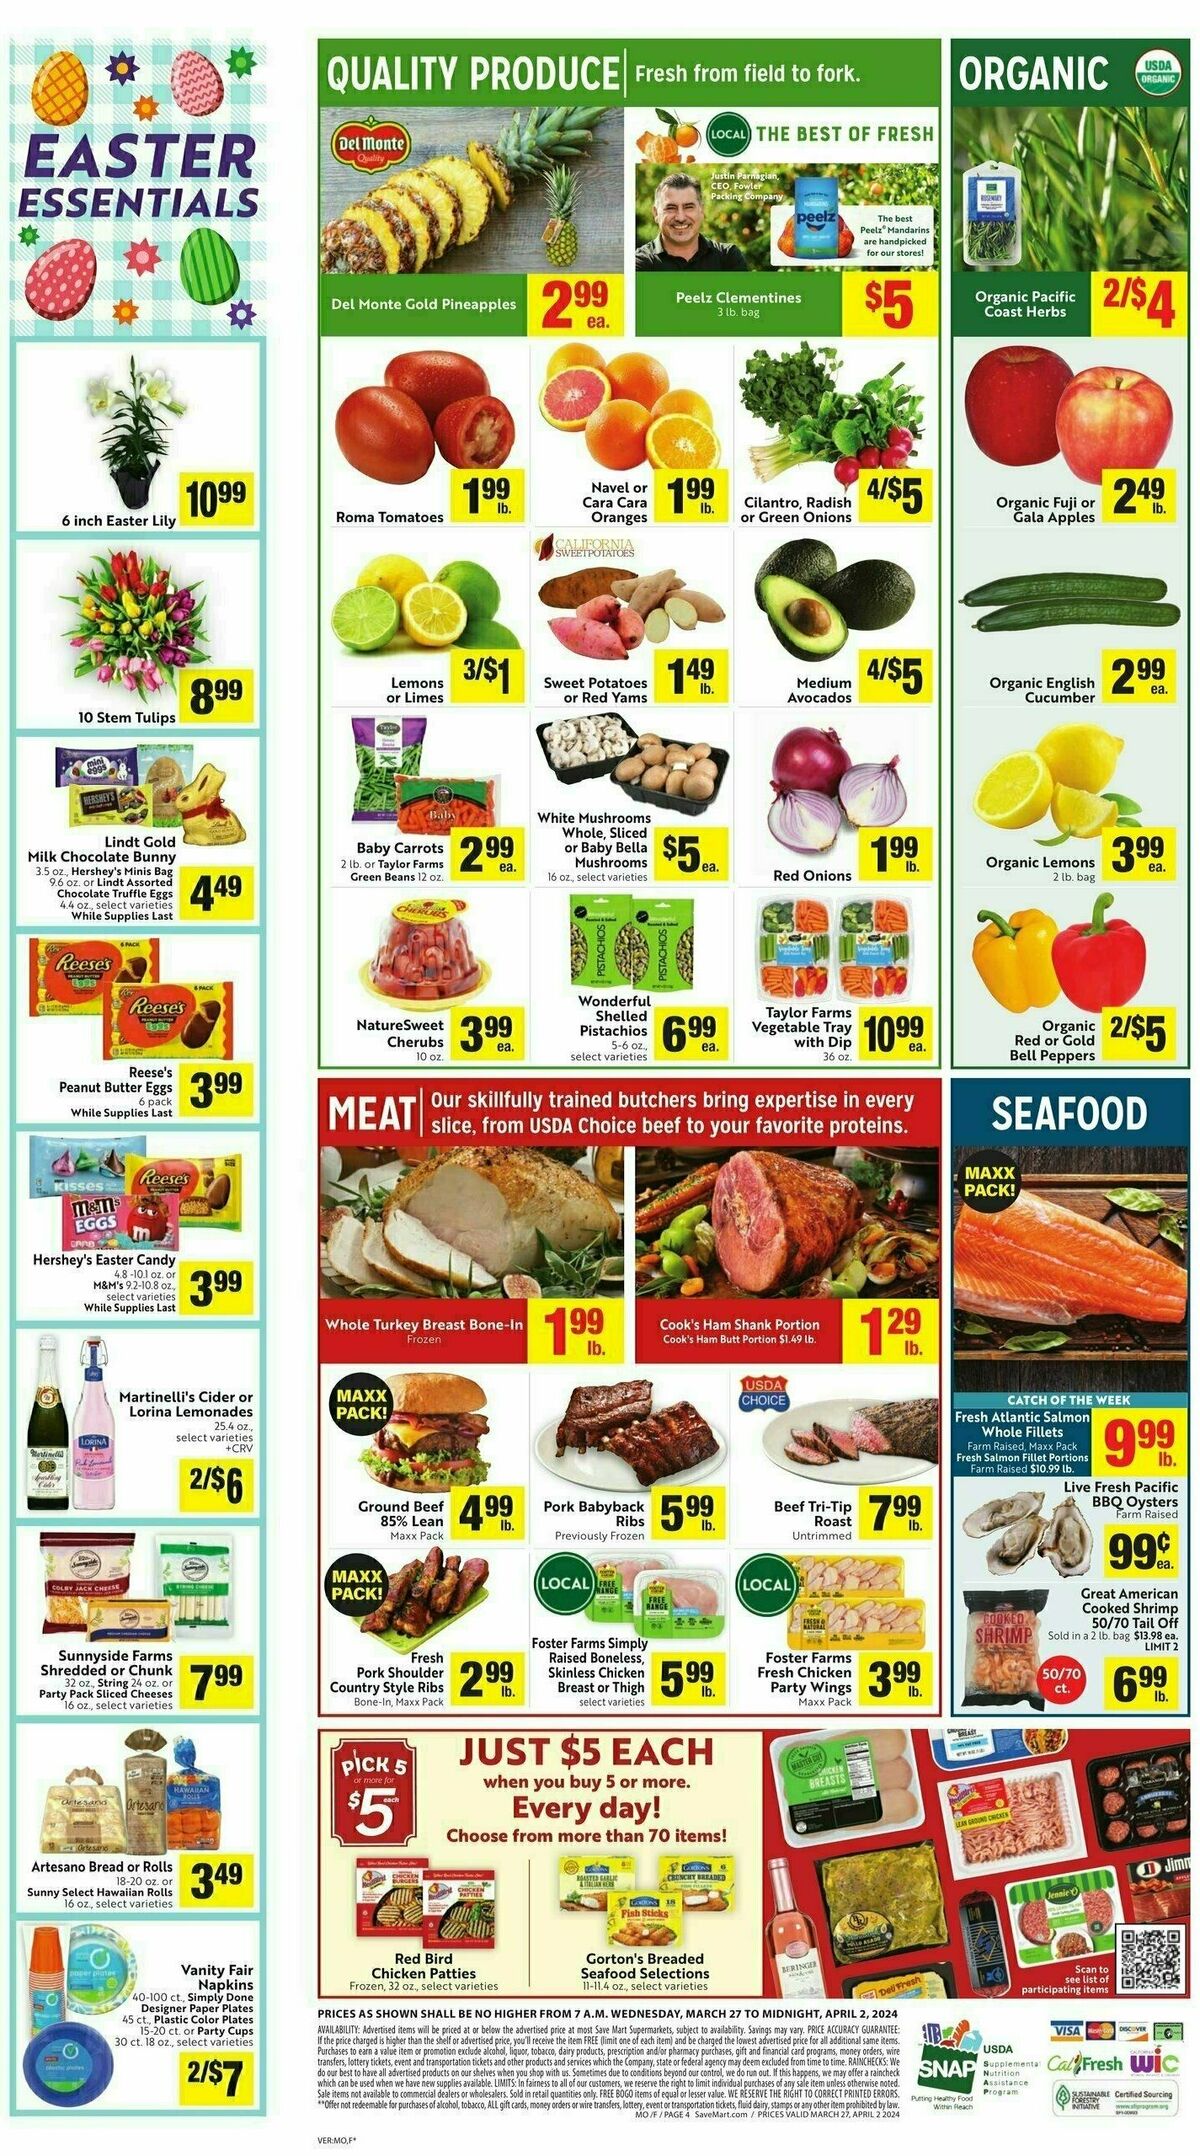 Save Mart Weekly Ad from March 27